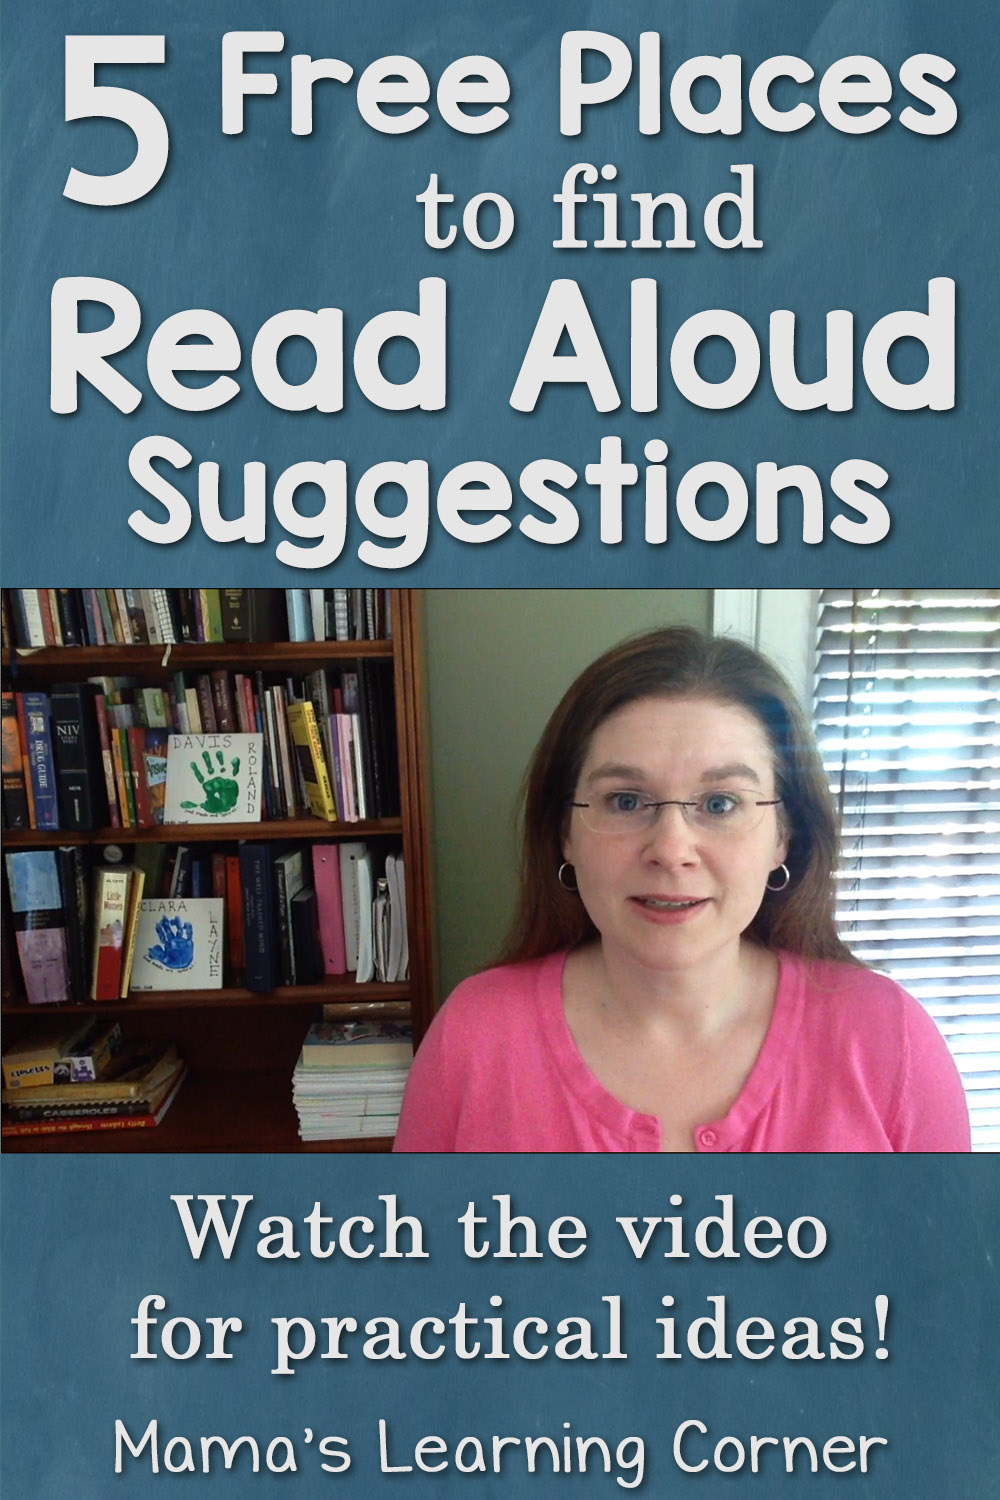 5 Free Places to Find Read Aloud Suggestions